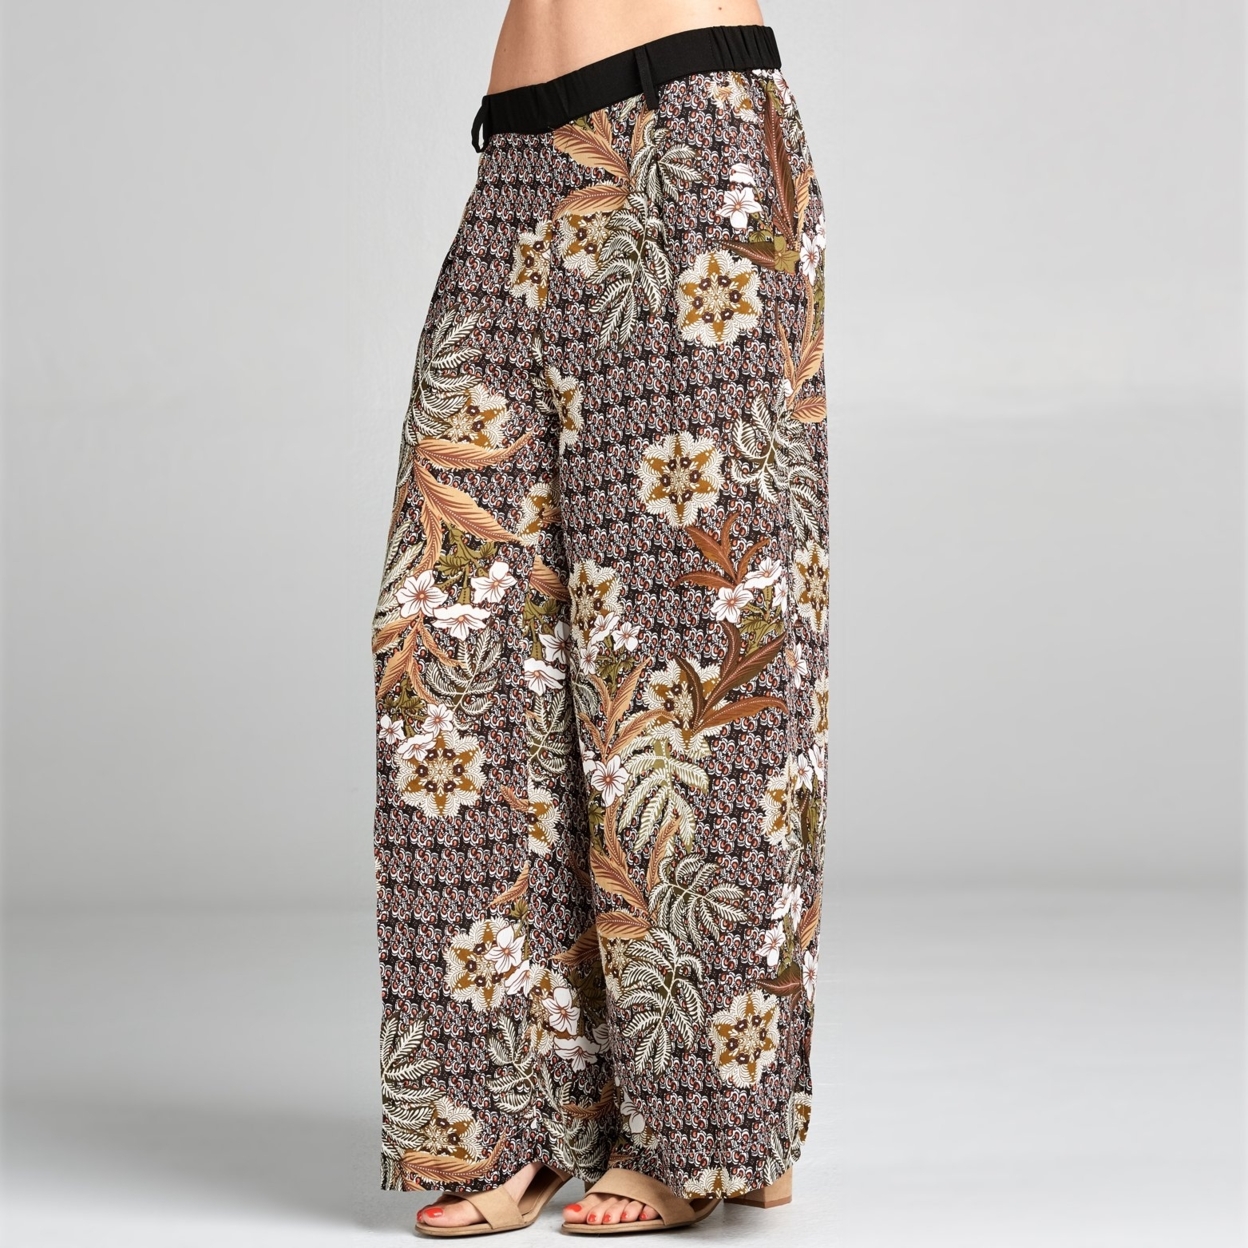 Olive Floral Palazzo Pants - Olive, Large (12-14)